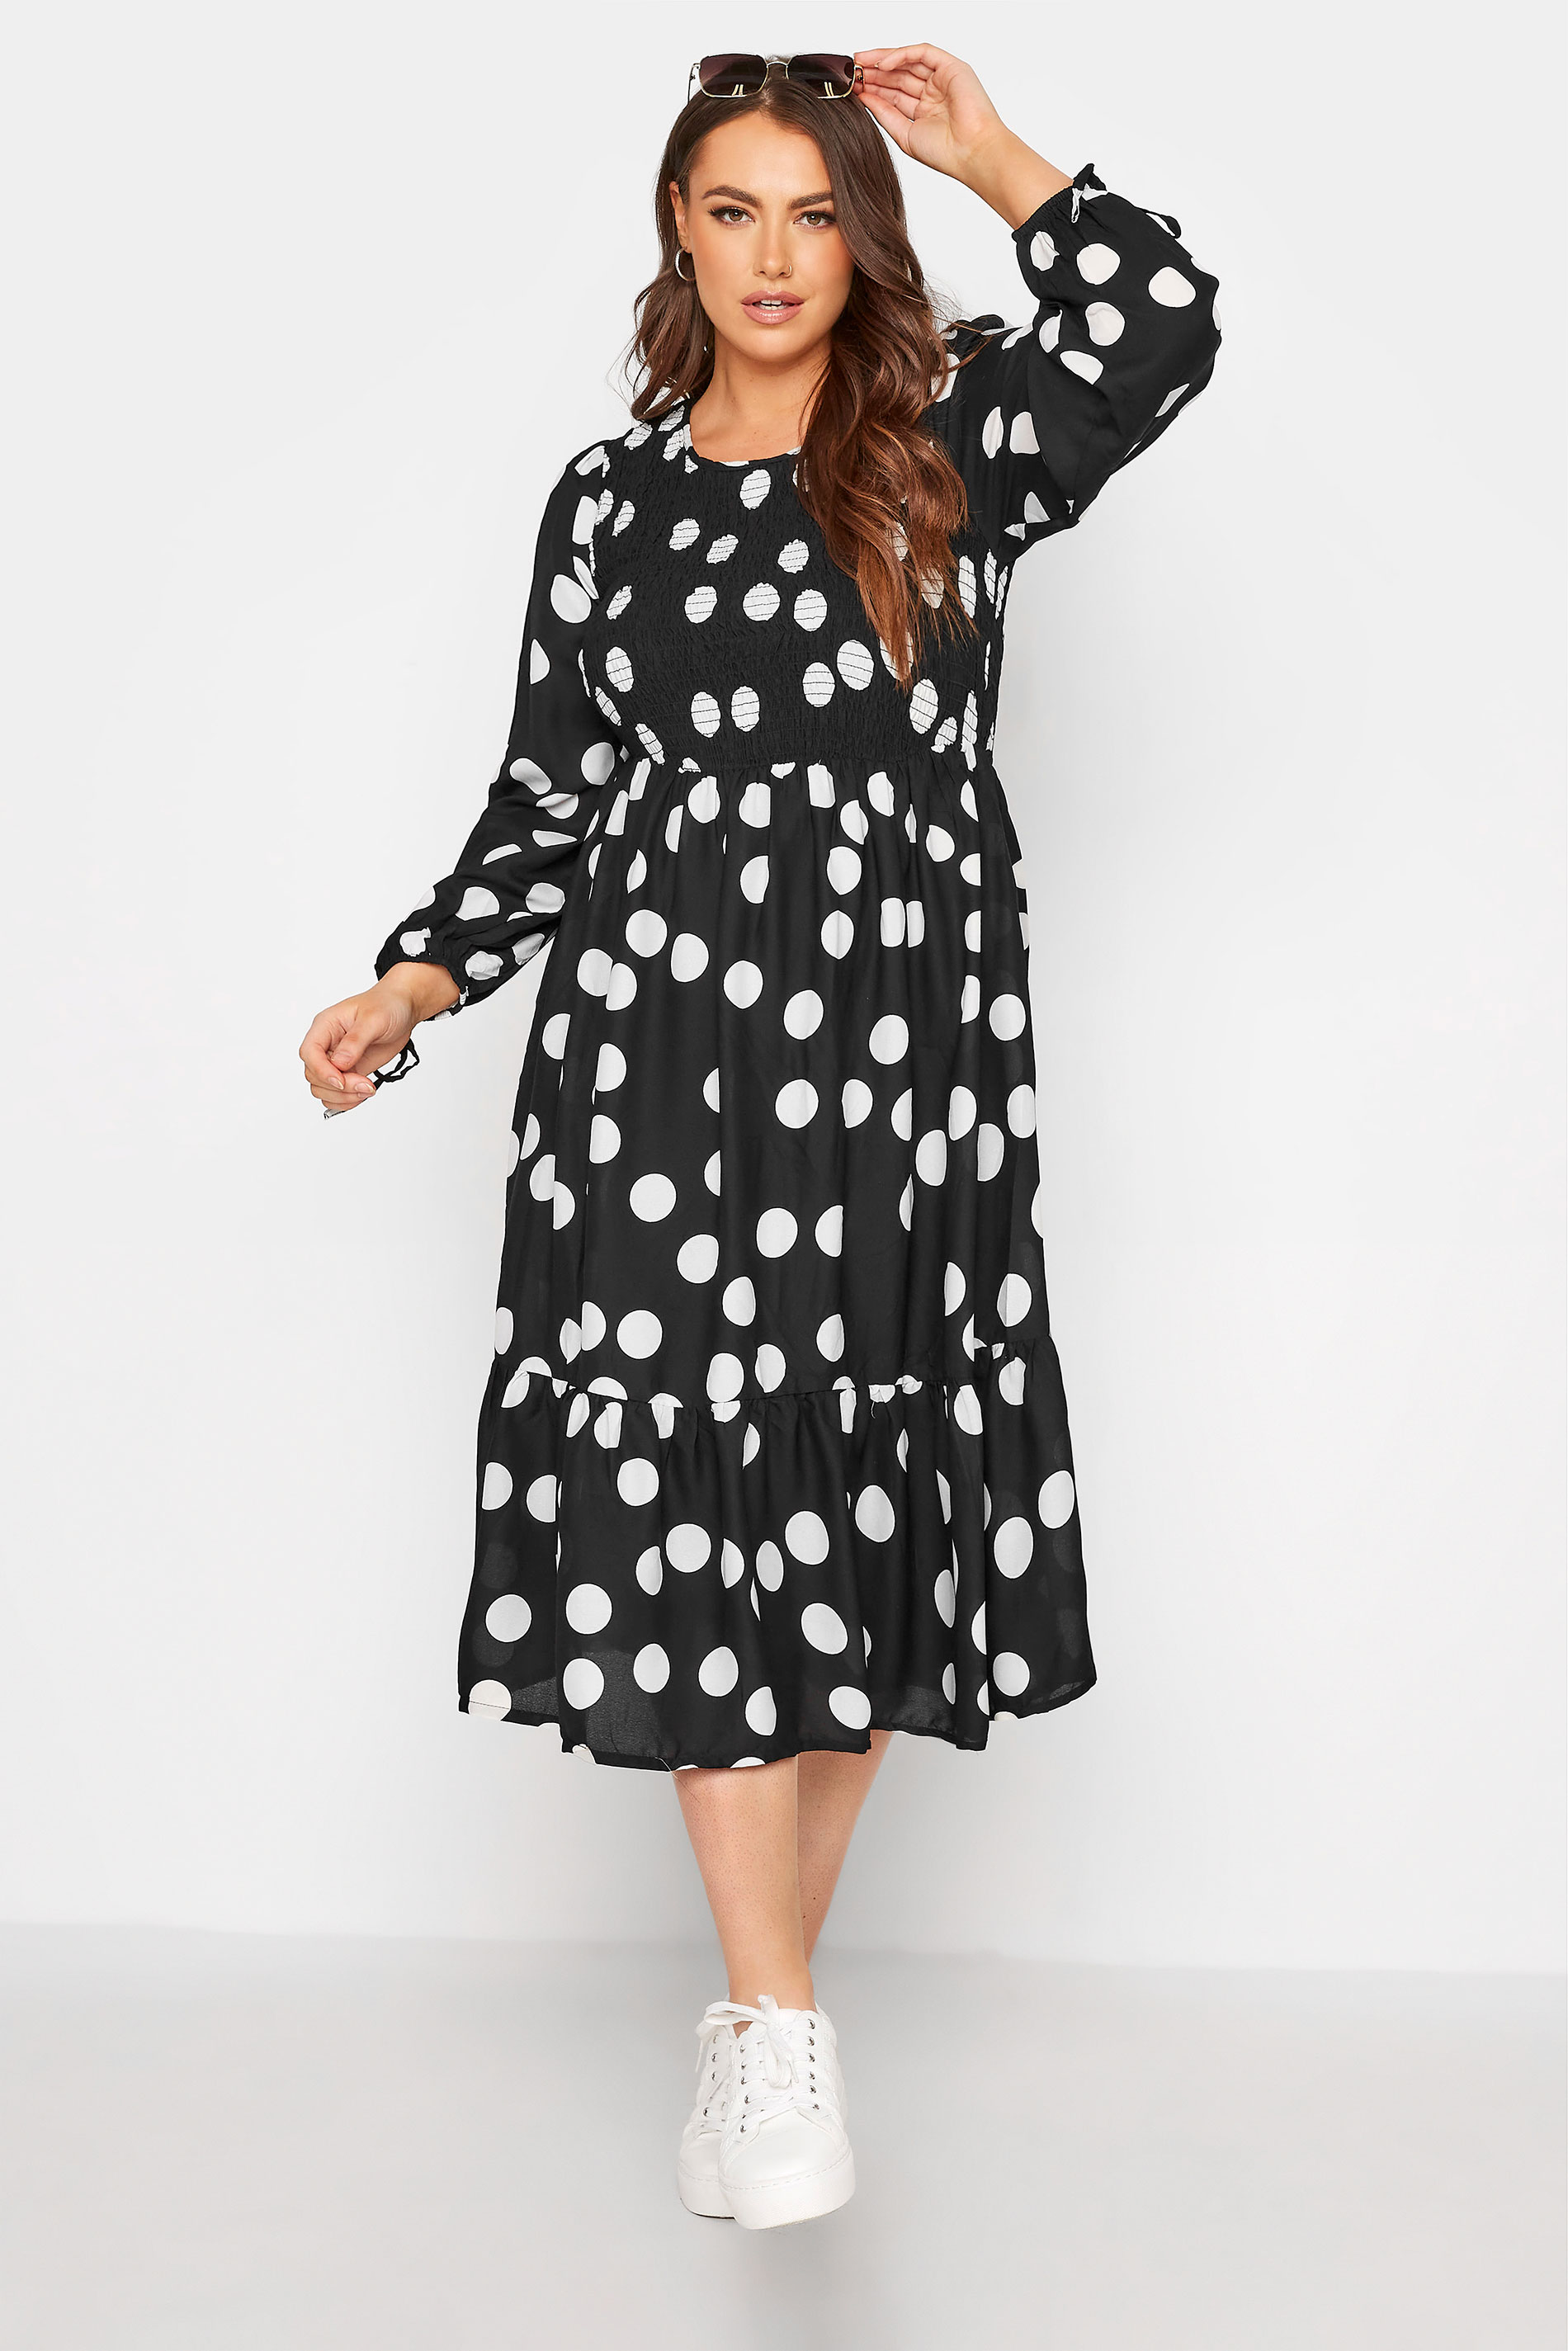 Robes Grande Taille Grande taille  Robes Noires | LIMITED COLLECTION - Robe Noire Midi à Pois Blancs - XD98945